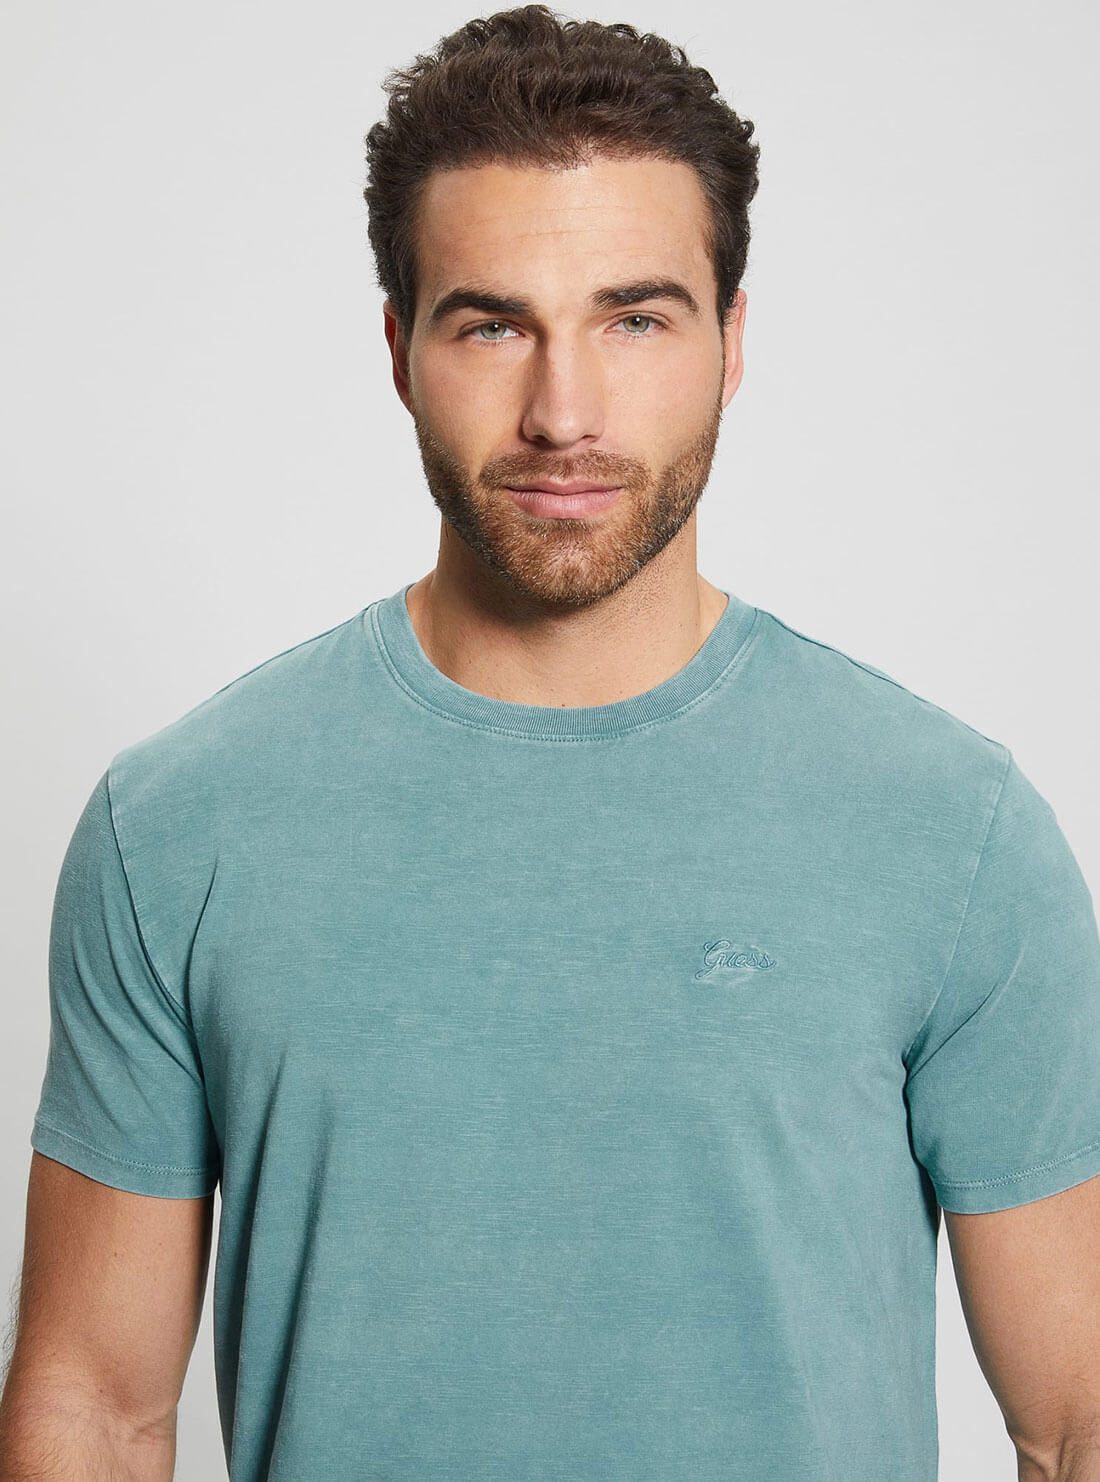 Teal Blue Eli Washed T-Shirt | GUESS Men's Apparel | detail view